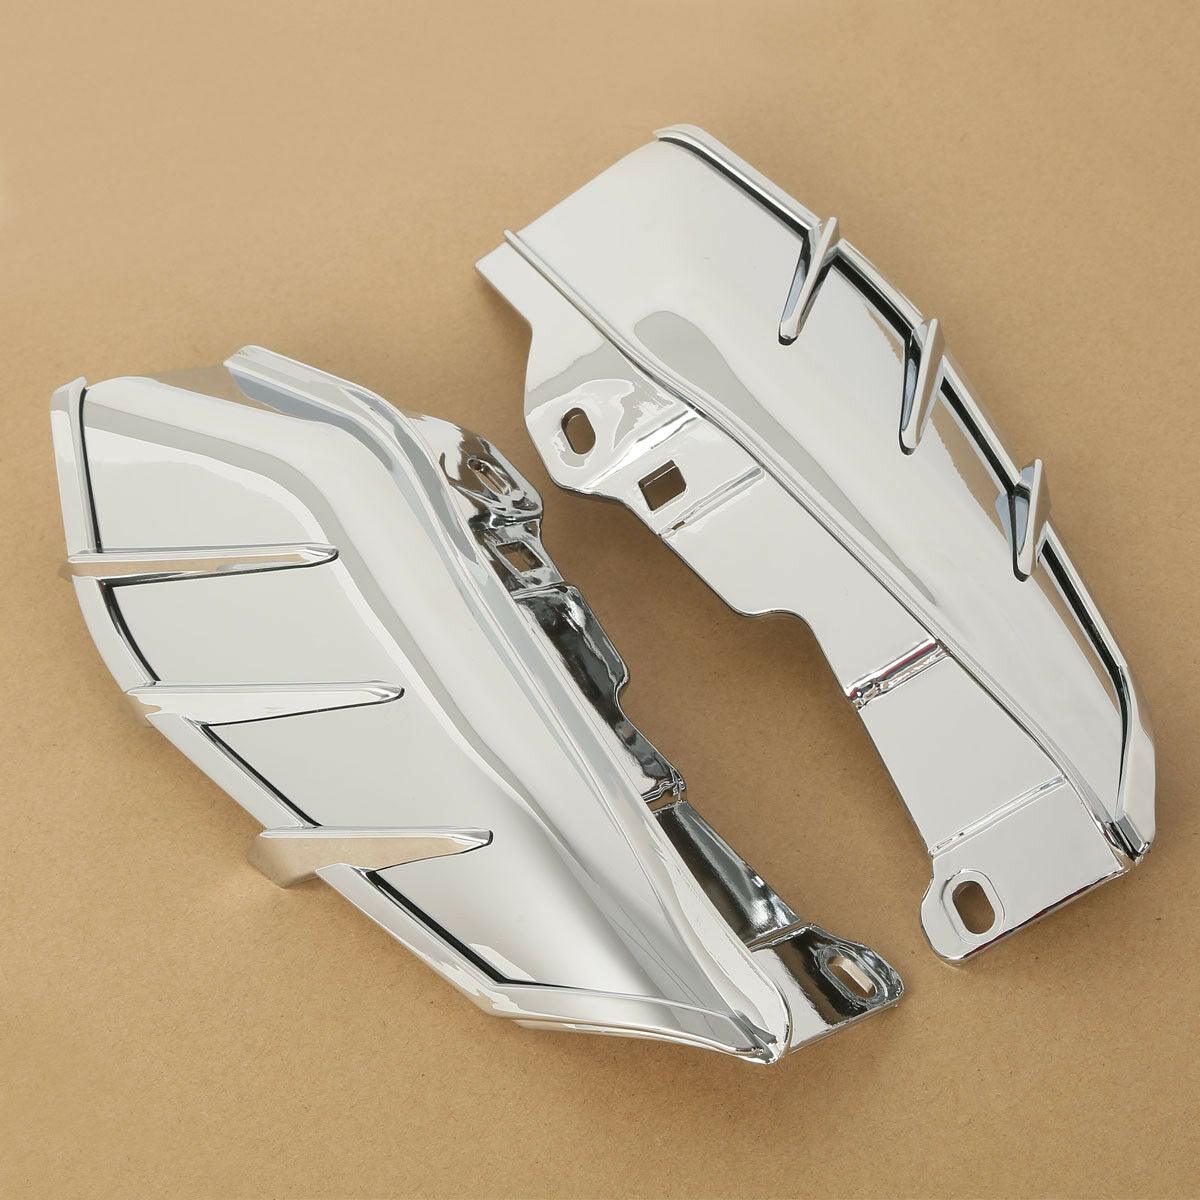 Chrome/Black Mid-Frame Air Deflector Trim Fit For Harley Touring Trike 2009-2016 - Moto Life Products